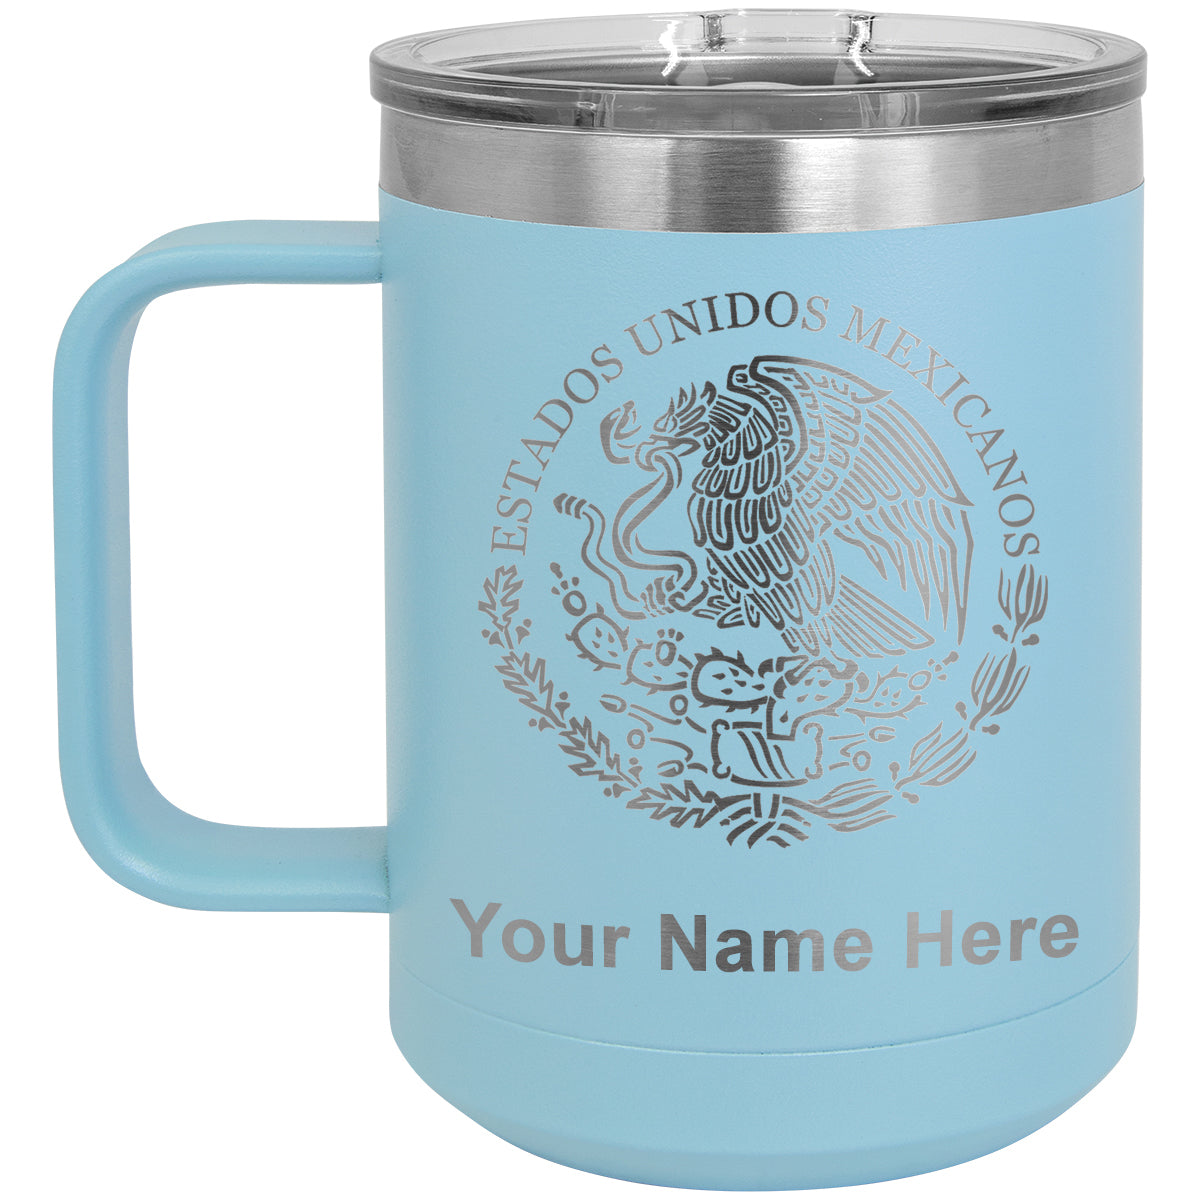 15oz Vacuum Insulated Coffee Mug, Flag of Mexico, Personalized Engraving Included